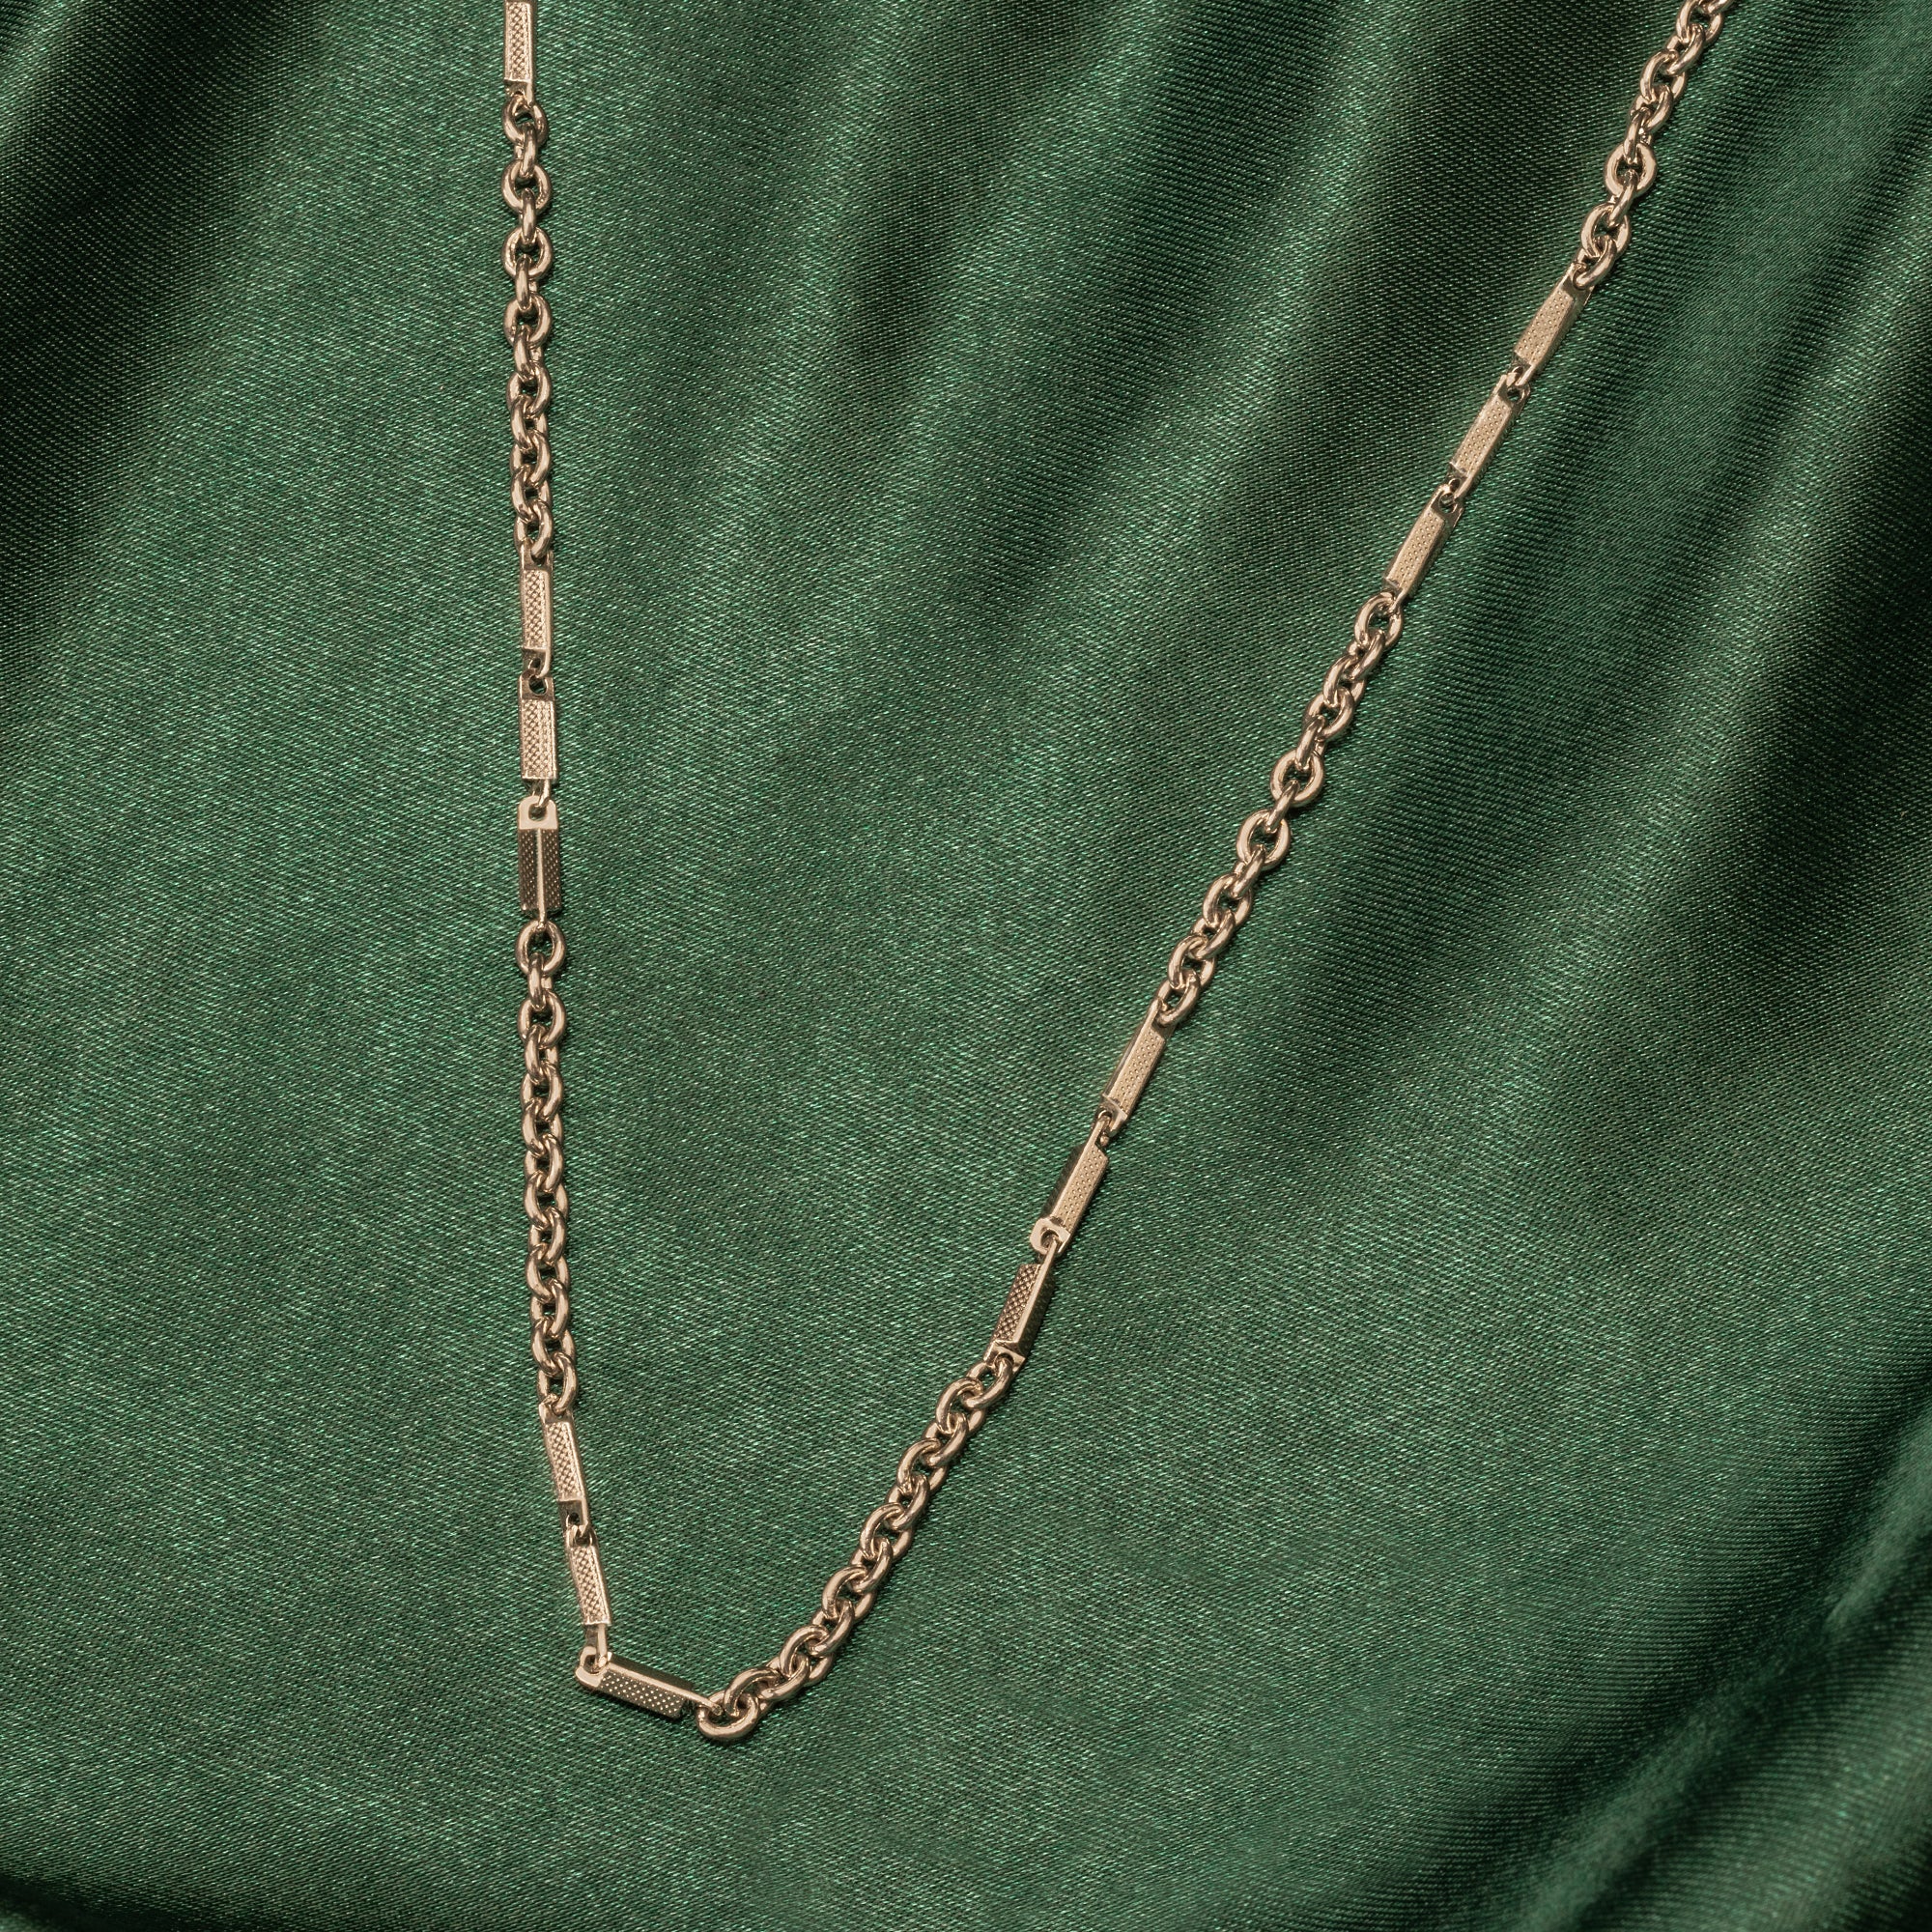 SOLID FORTITUDE NECK CHAIN | SKU: 0018674774